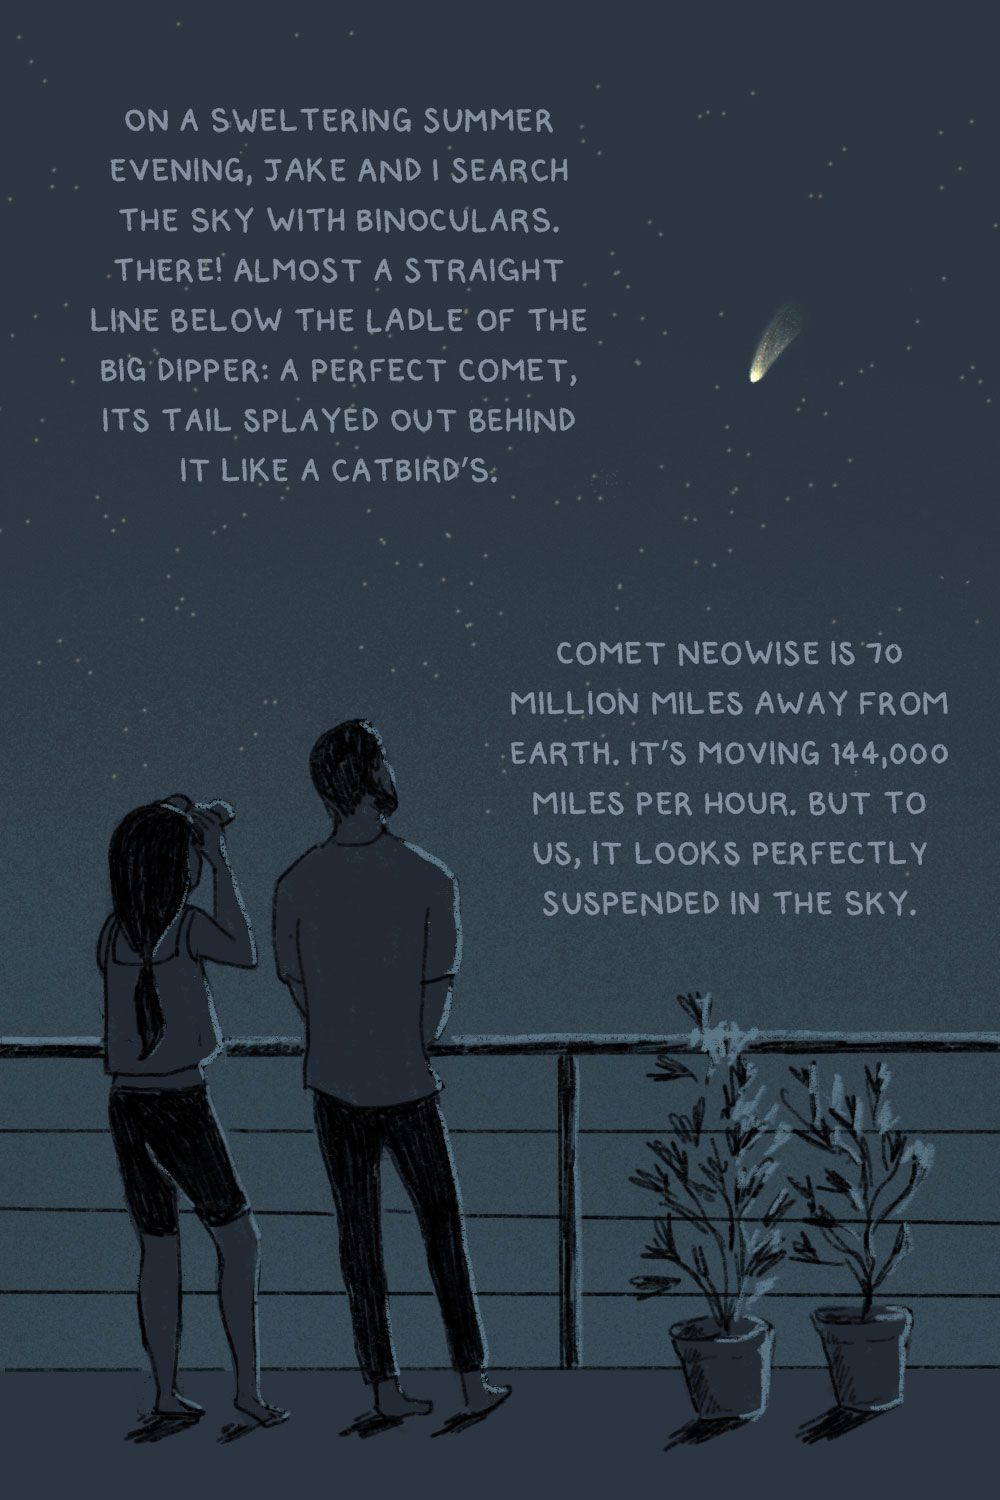 On a sweltering summer evening, Jake and I search the sky with binoculars. There! Almost a straight line below the ladle of the Big Dipper: a perfect comet, its tail splayed out behind it like a catbird’s. Comet Neowise is 70 million miles away from Earth. It’s moving 144,000 miles per hour, but to us, it looks perfectly suspended in the sky.